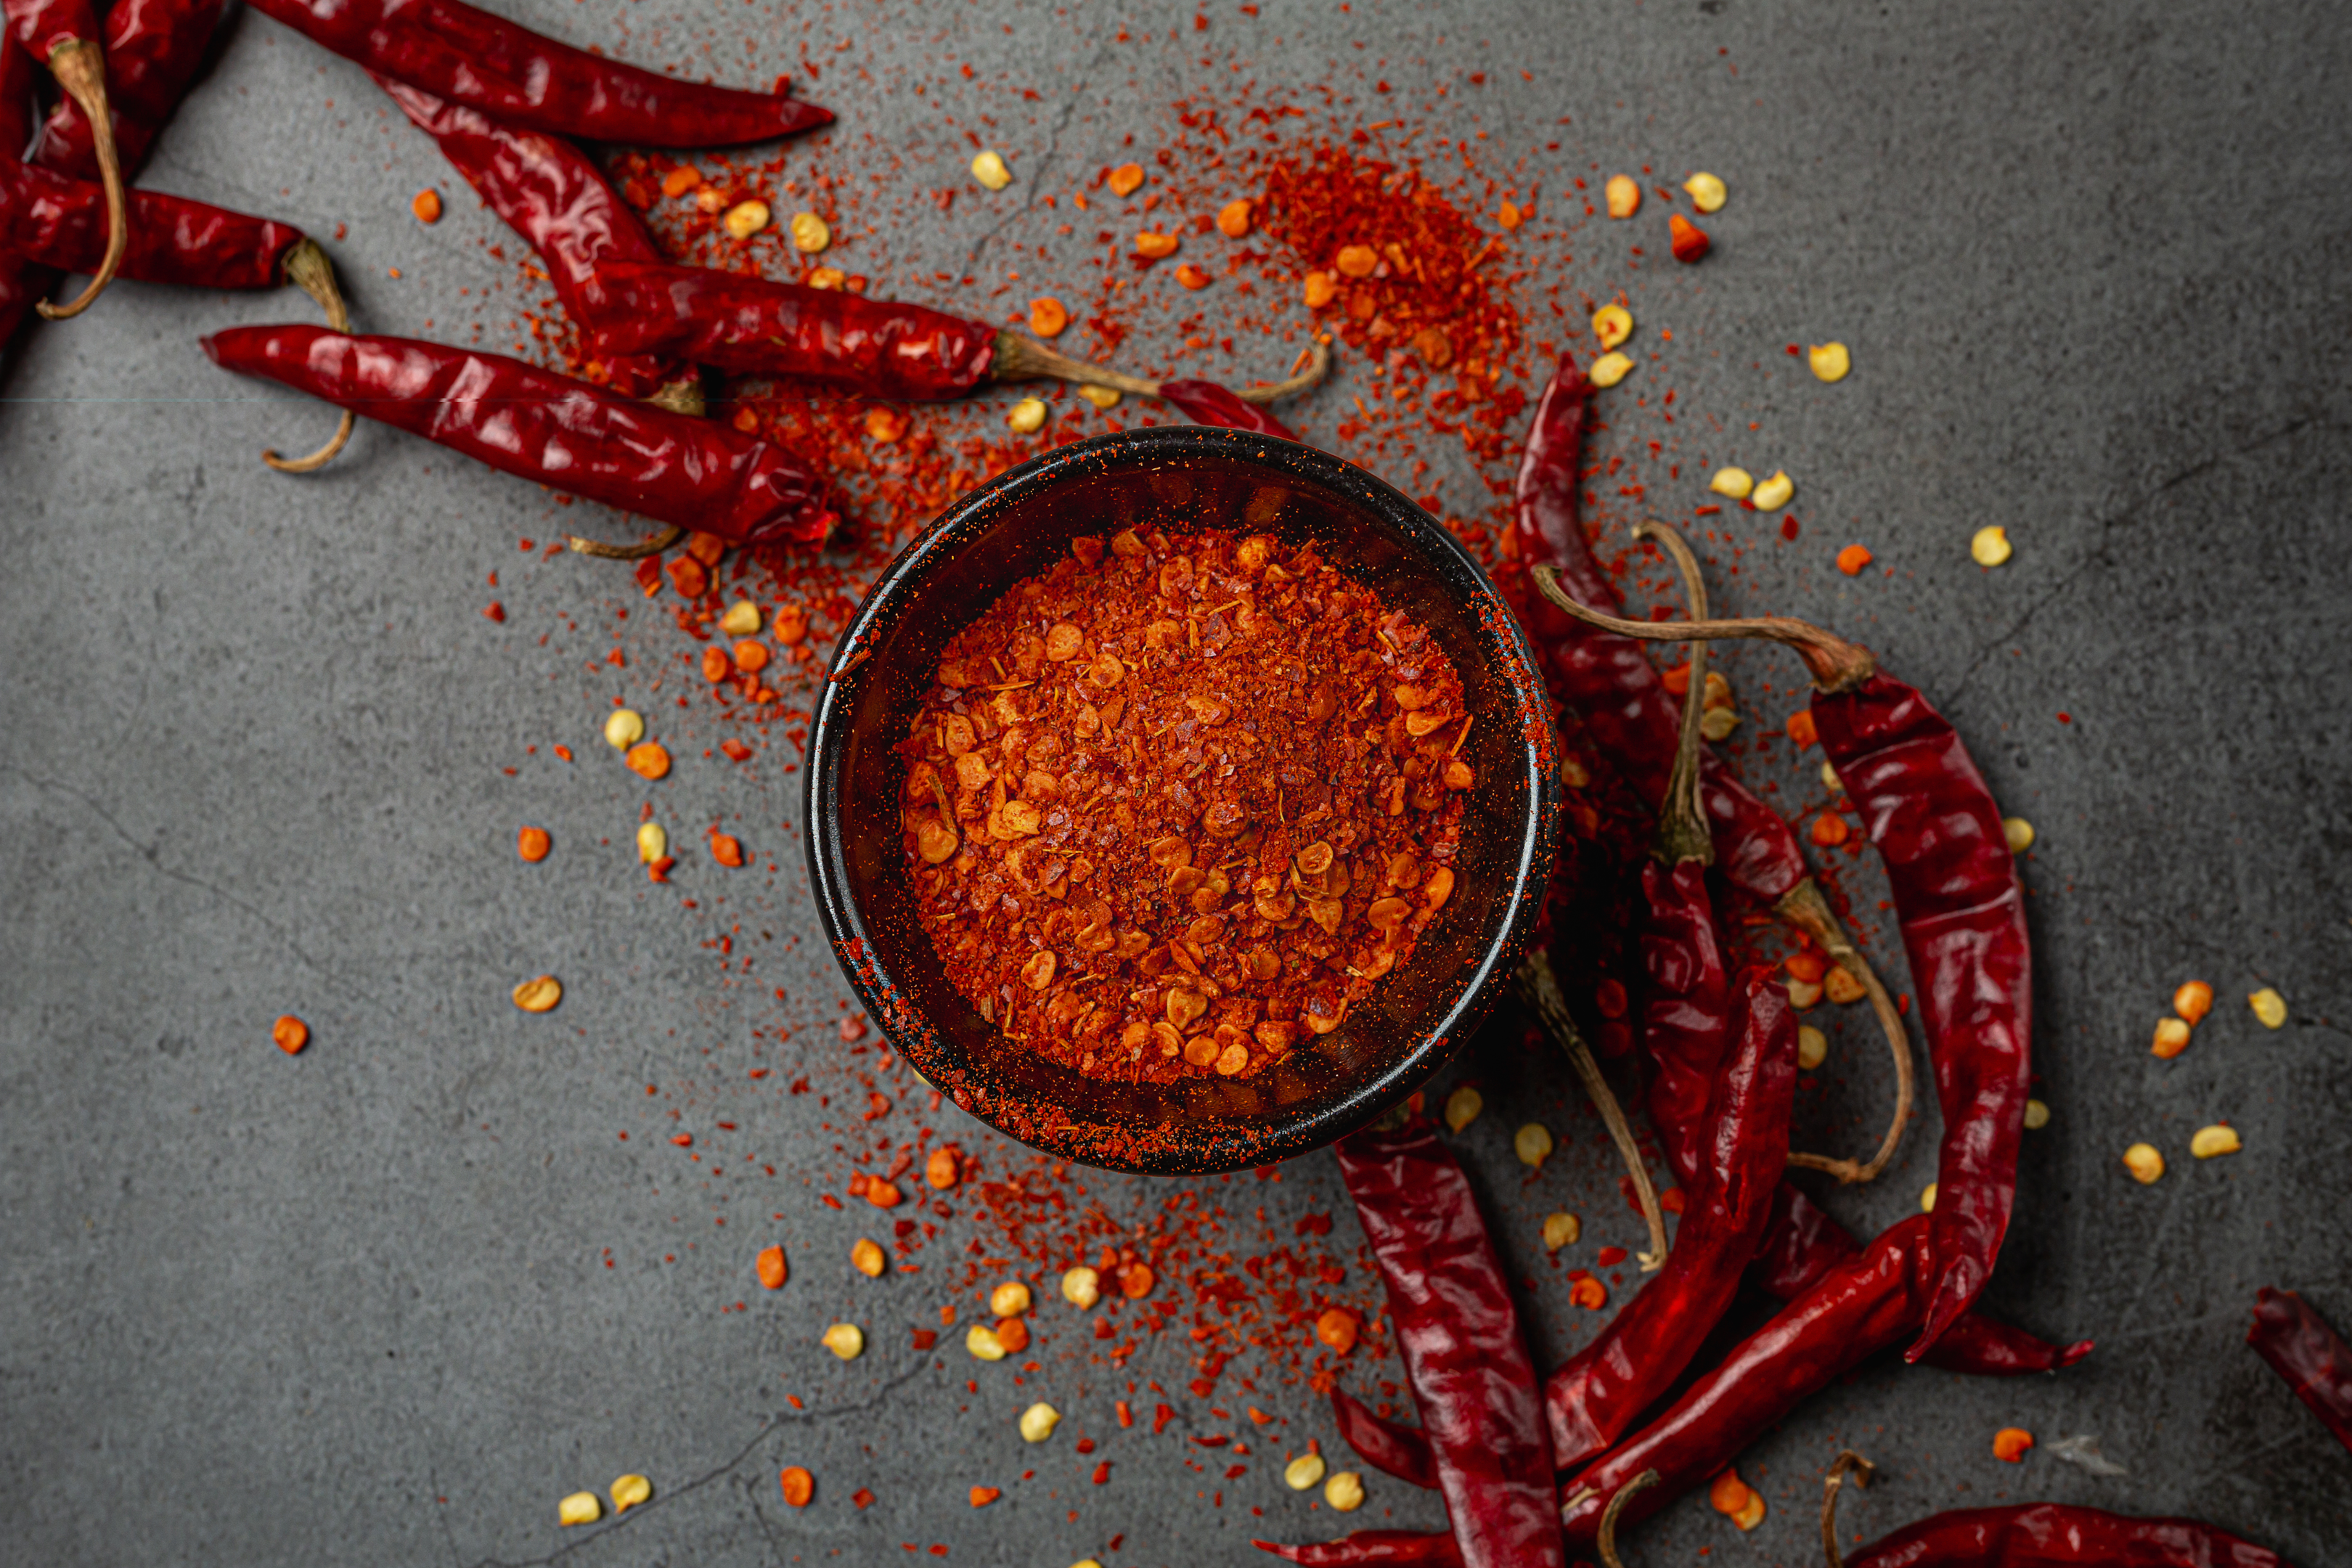 Red chilli irritates your taste buds and improves your heart health.